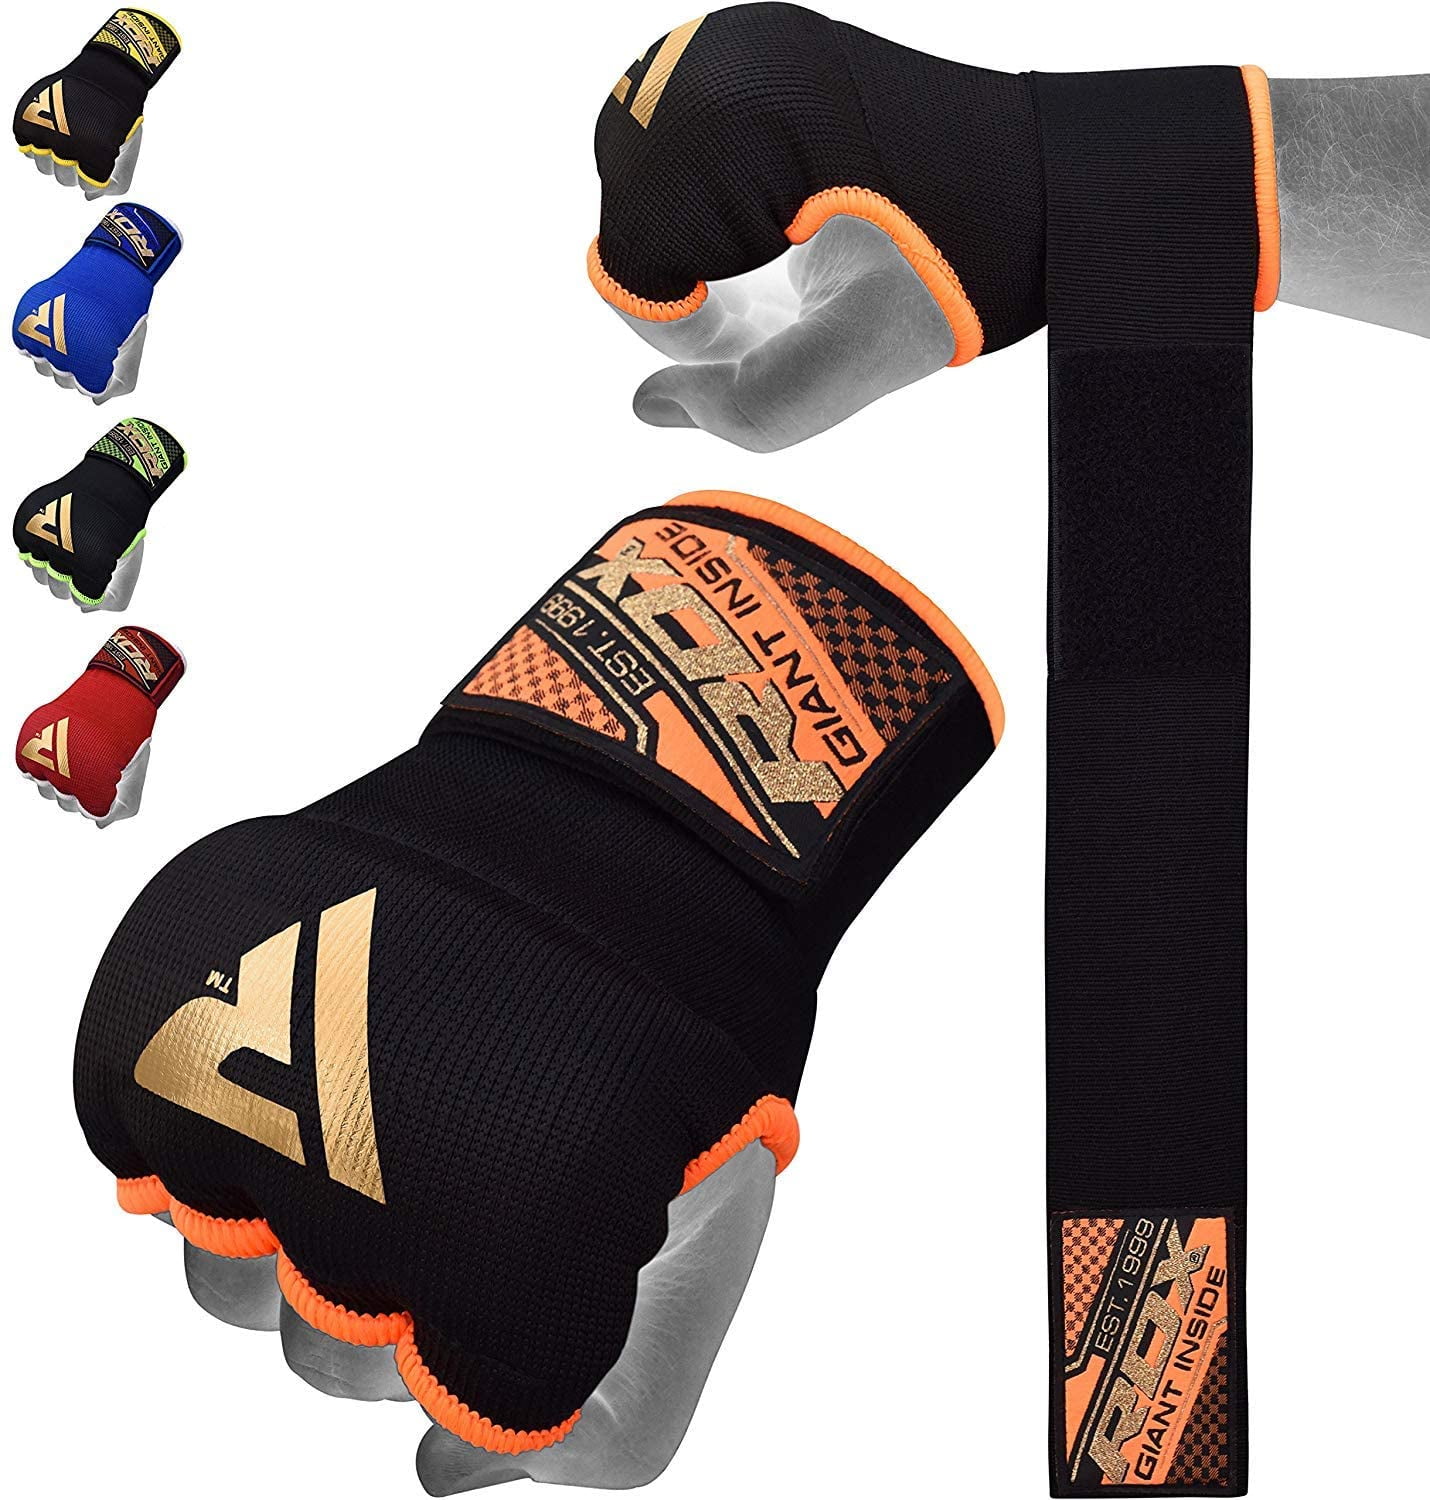 Boxing Wraps Padded Hand Bandages Muay Thai Martial Arts Inner Gloves Mitts 